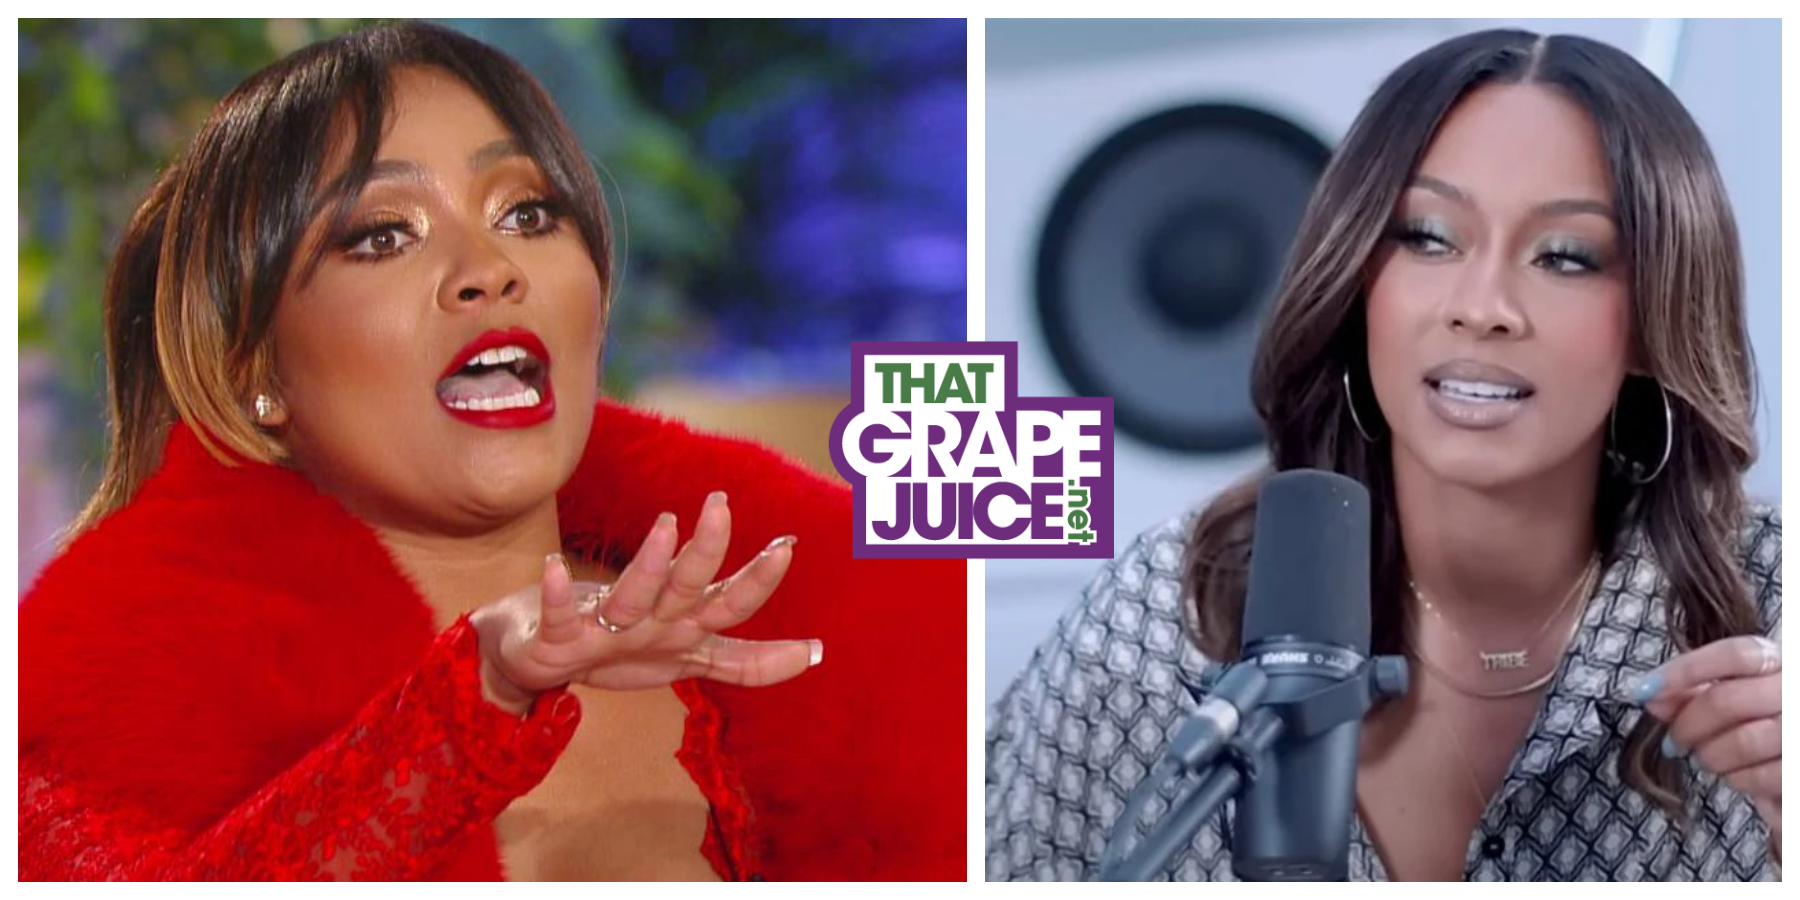 “I’m Sorry…It Was Unnecessary”: Keri Hilson Responds to Teairra Mari Threatening to “Whoop Her A**” Over Old Beef